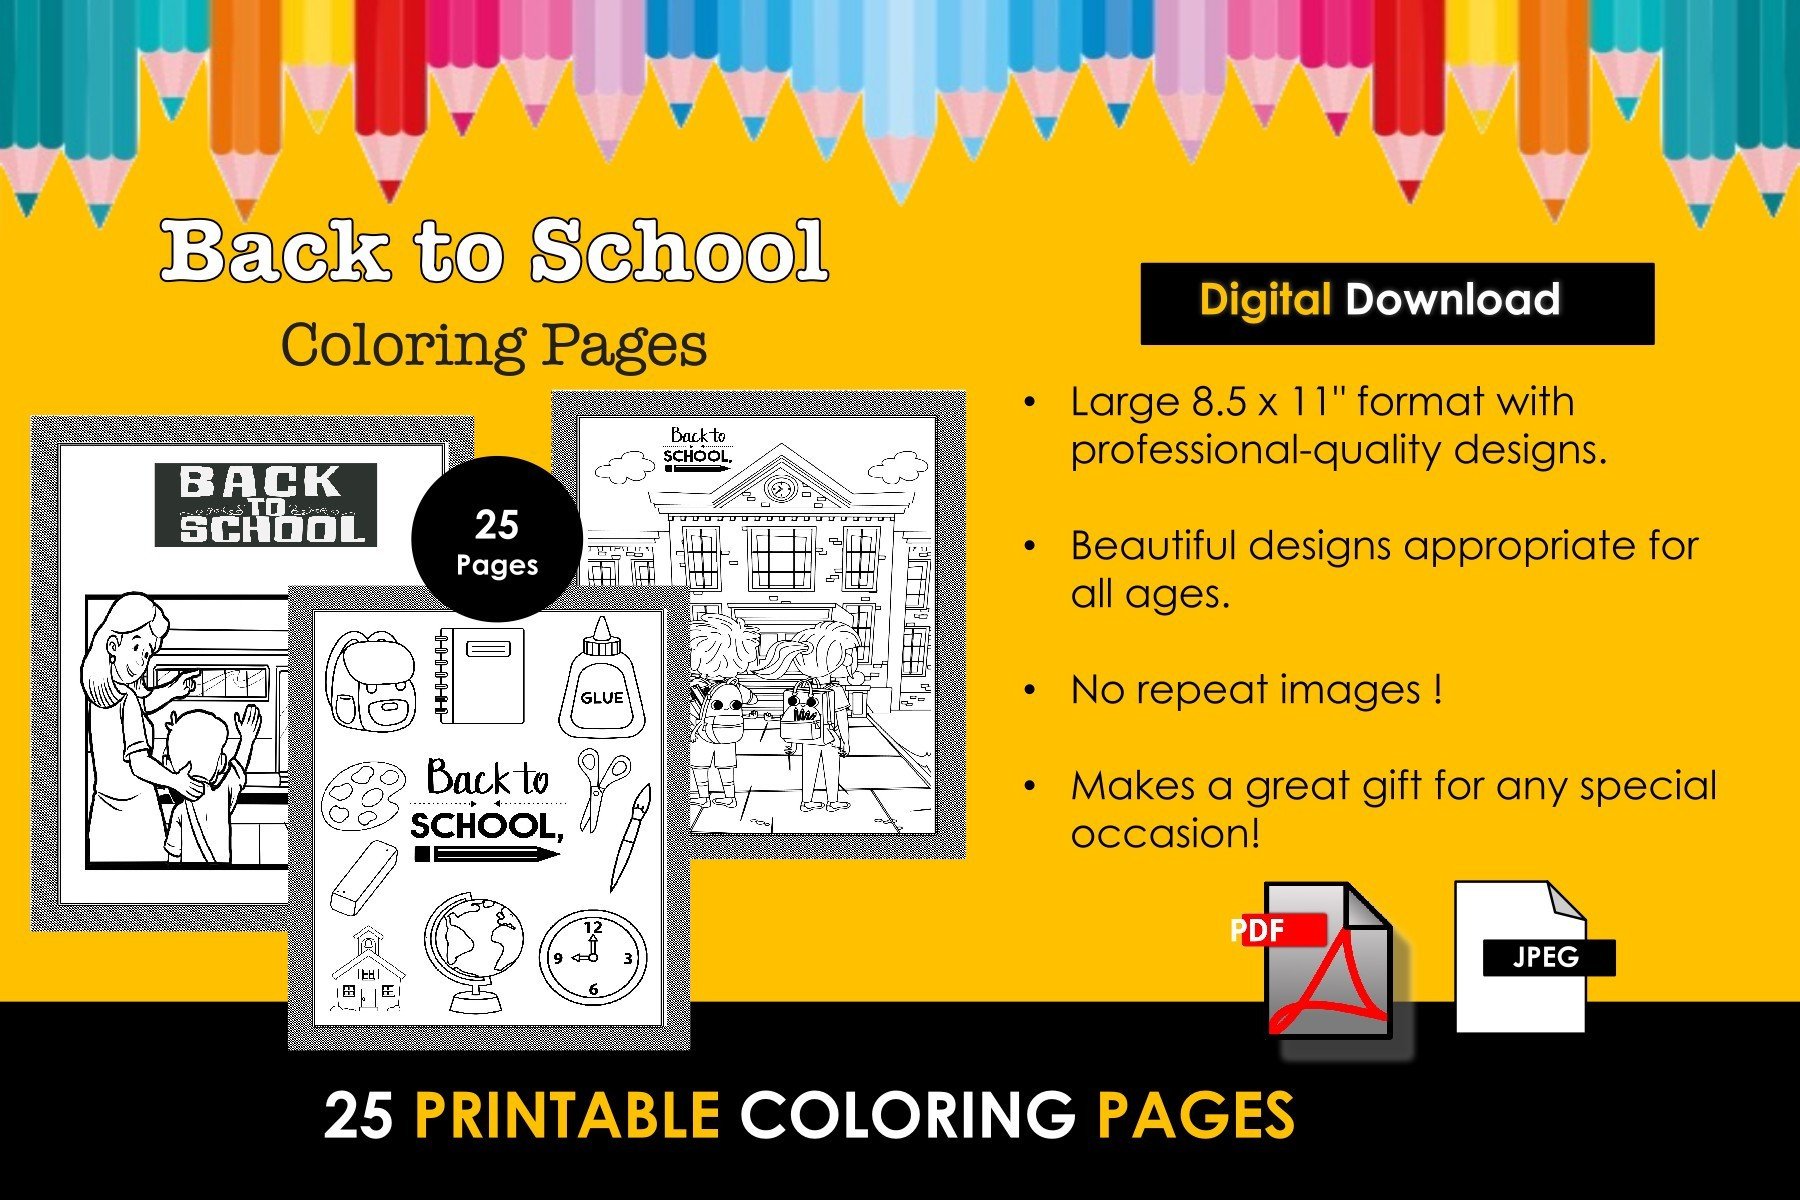 back-to-school-coloring-pages-for-kids-graphic-by-amicano-creative